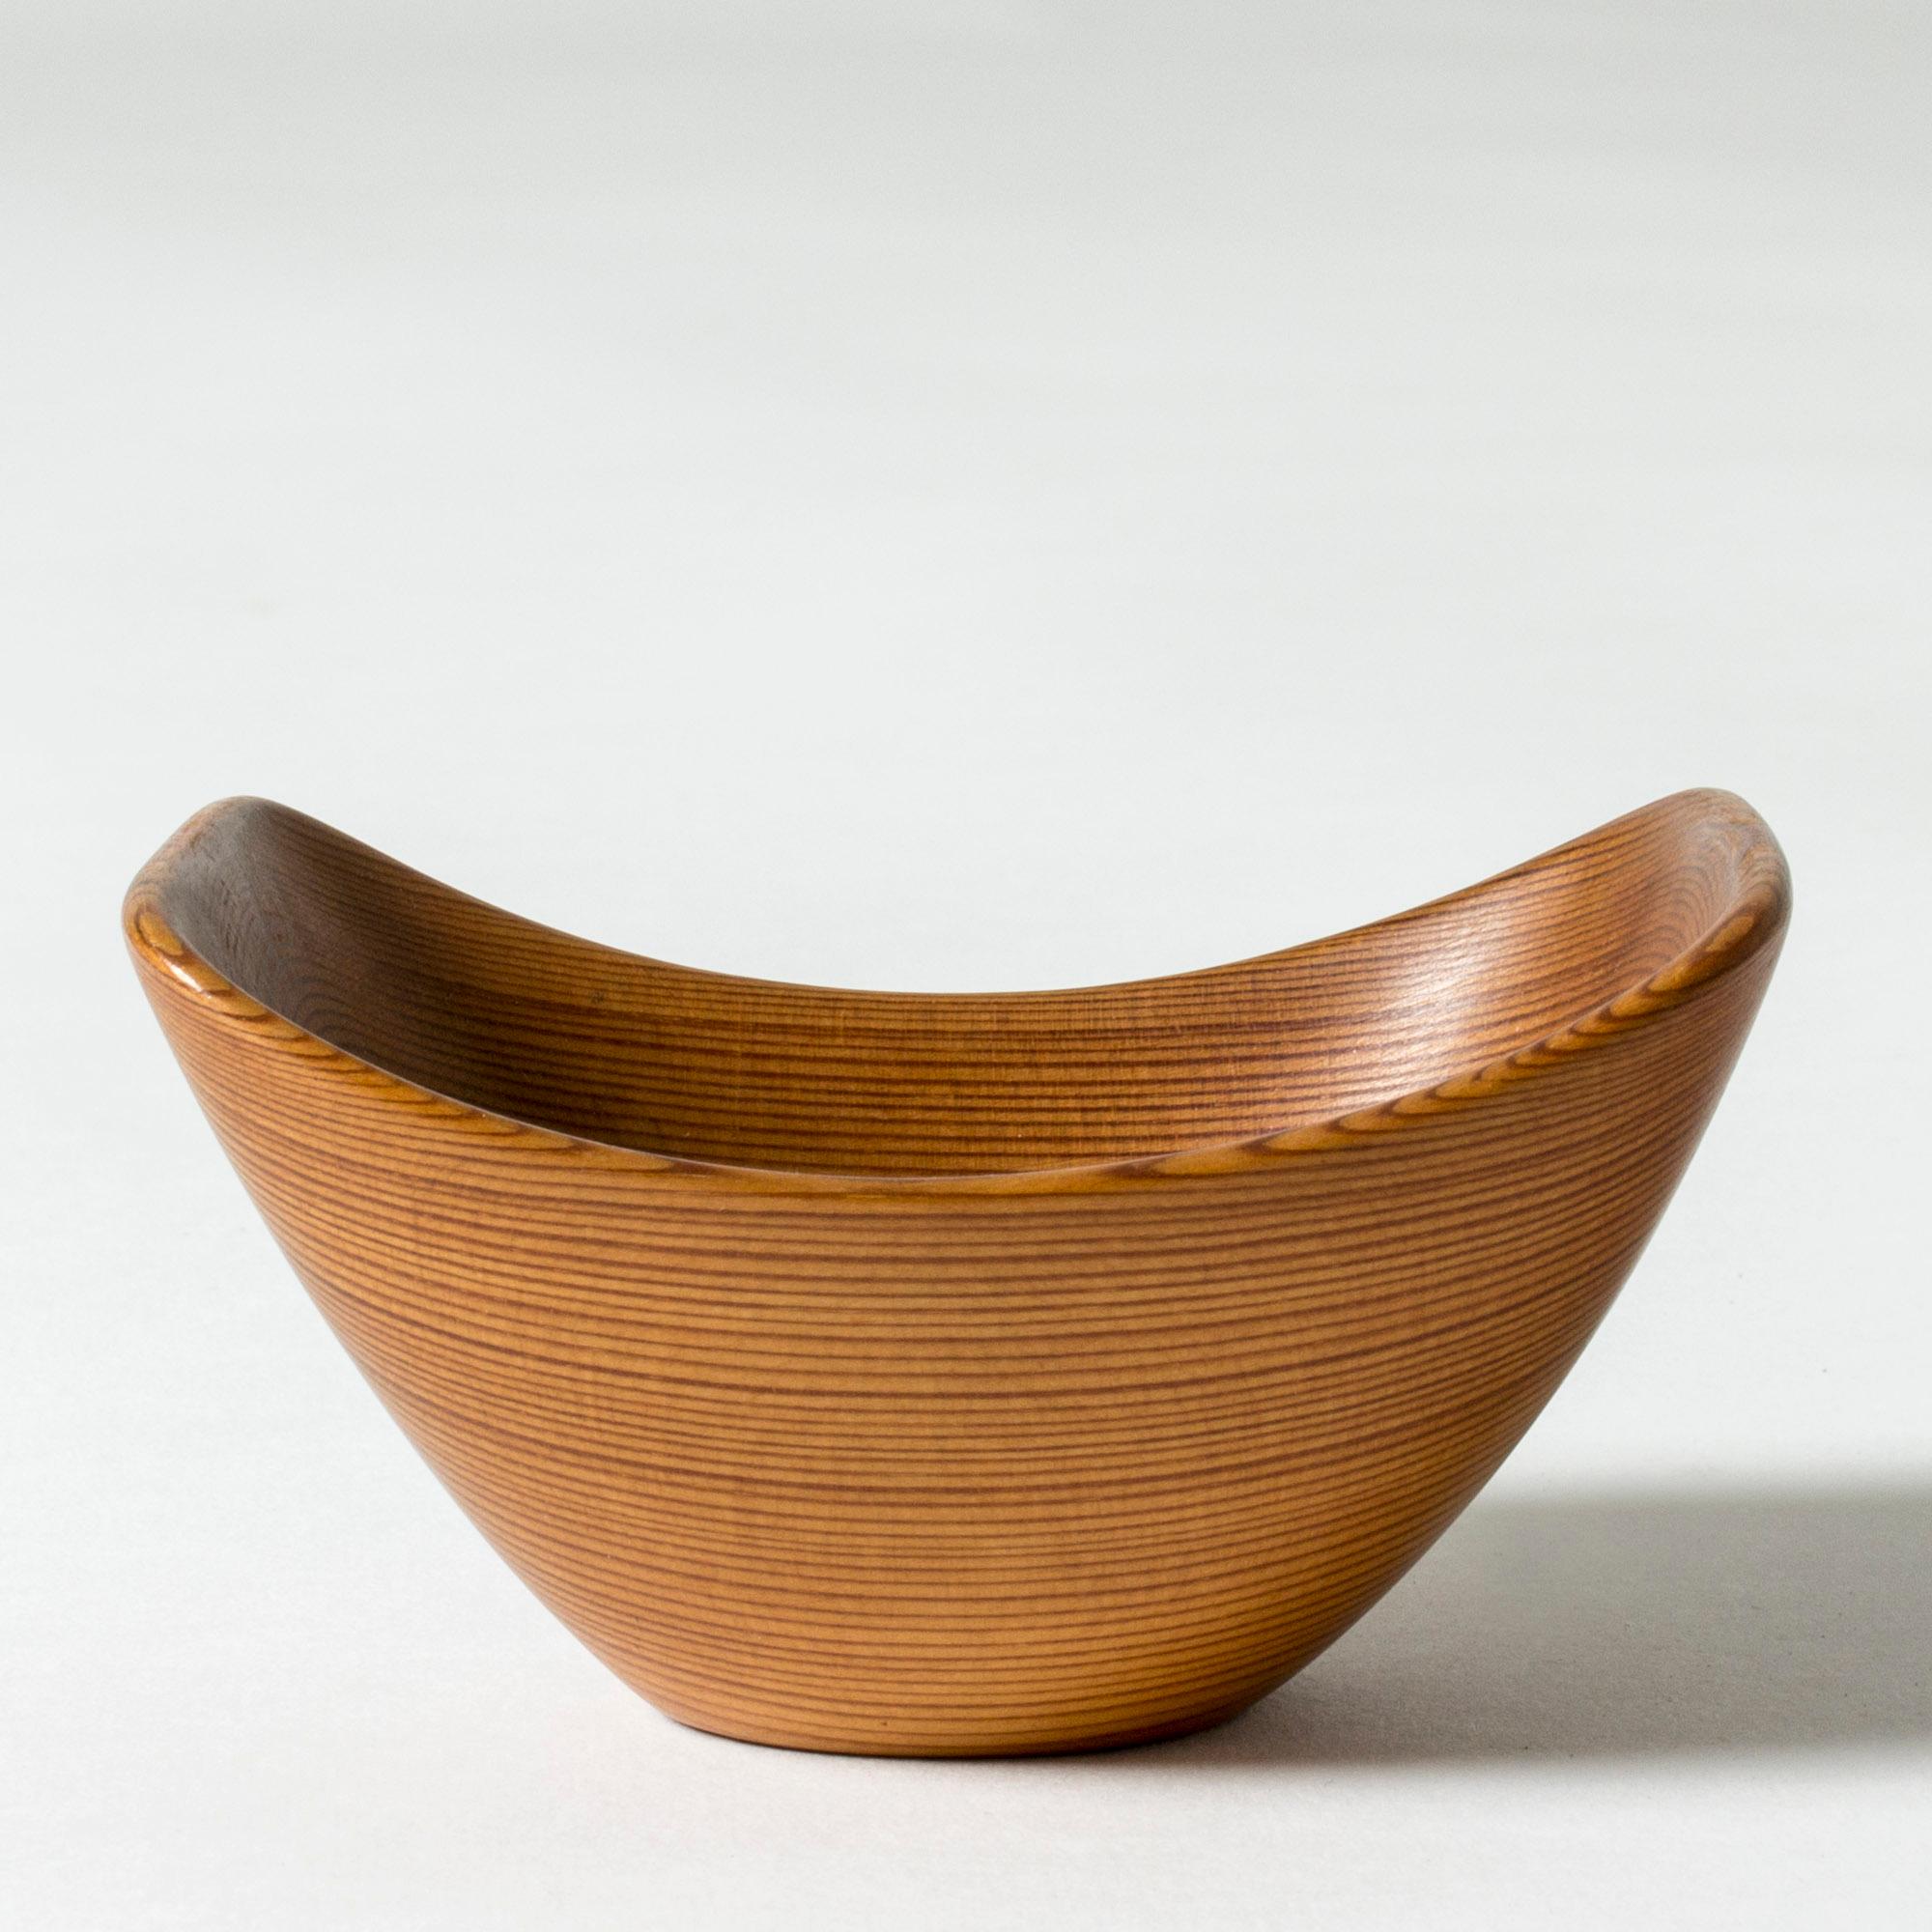 Lovely teak bowl by Johnny Mattsson, in a rectangular shape with curved edges. Seamlessly made, woodgrain accentuated by the form.